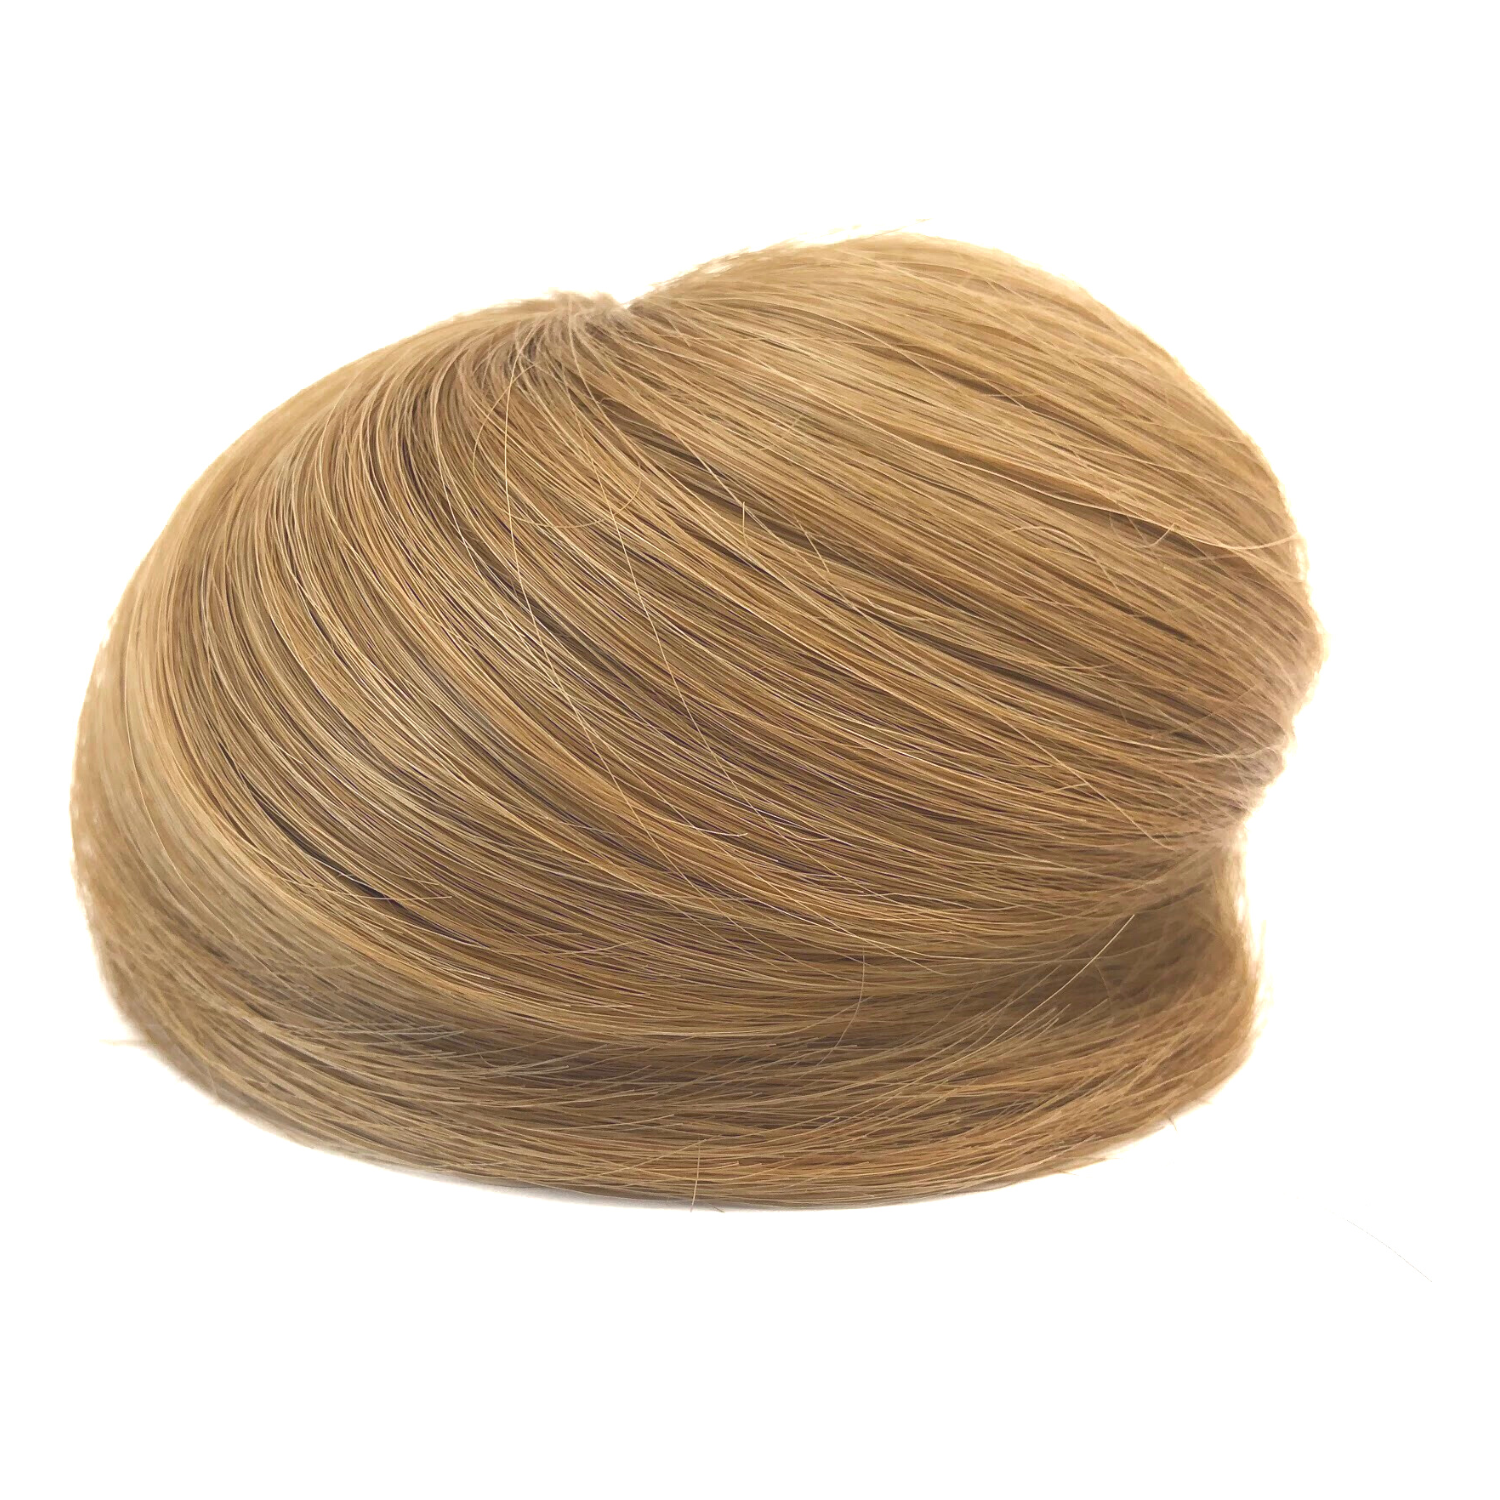 image of hair rehab london clip on bun hairpiece in shade toffee